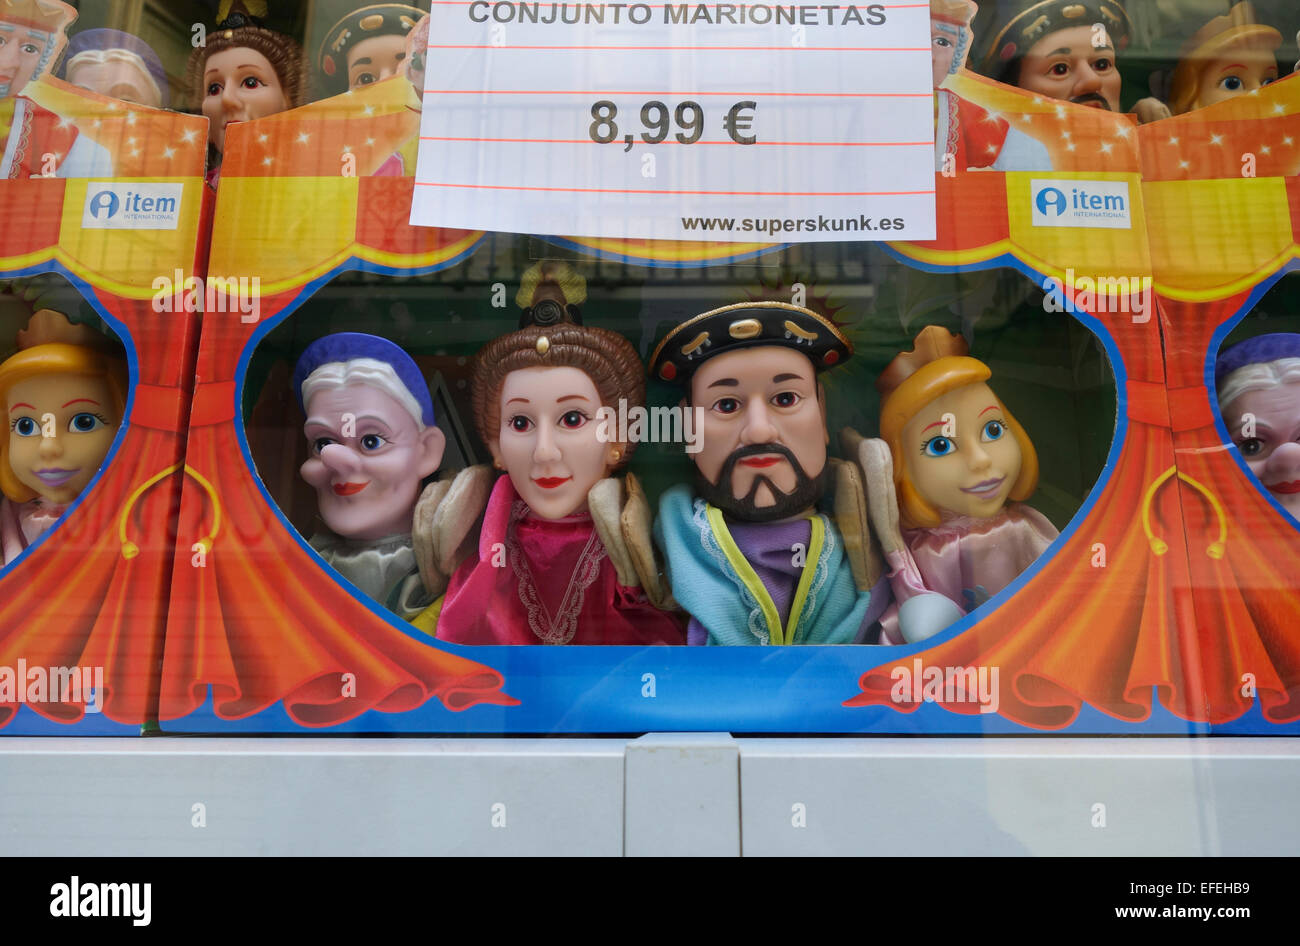 Hand puppets, glove, puppet theatre, puppet show on display in spanish shop, Malaga, Spain. Stock Photo